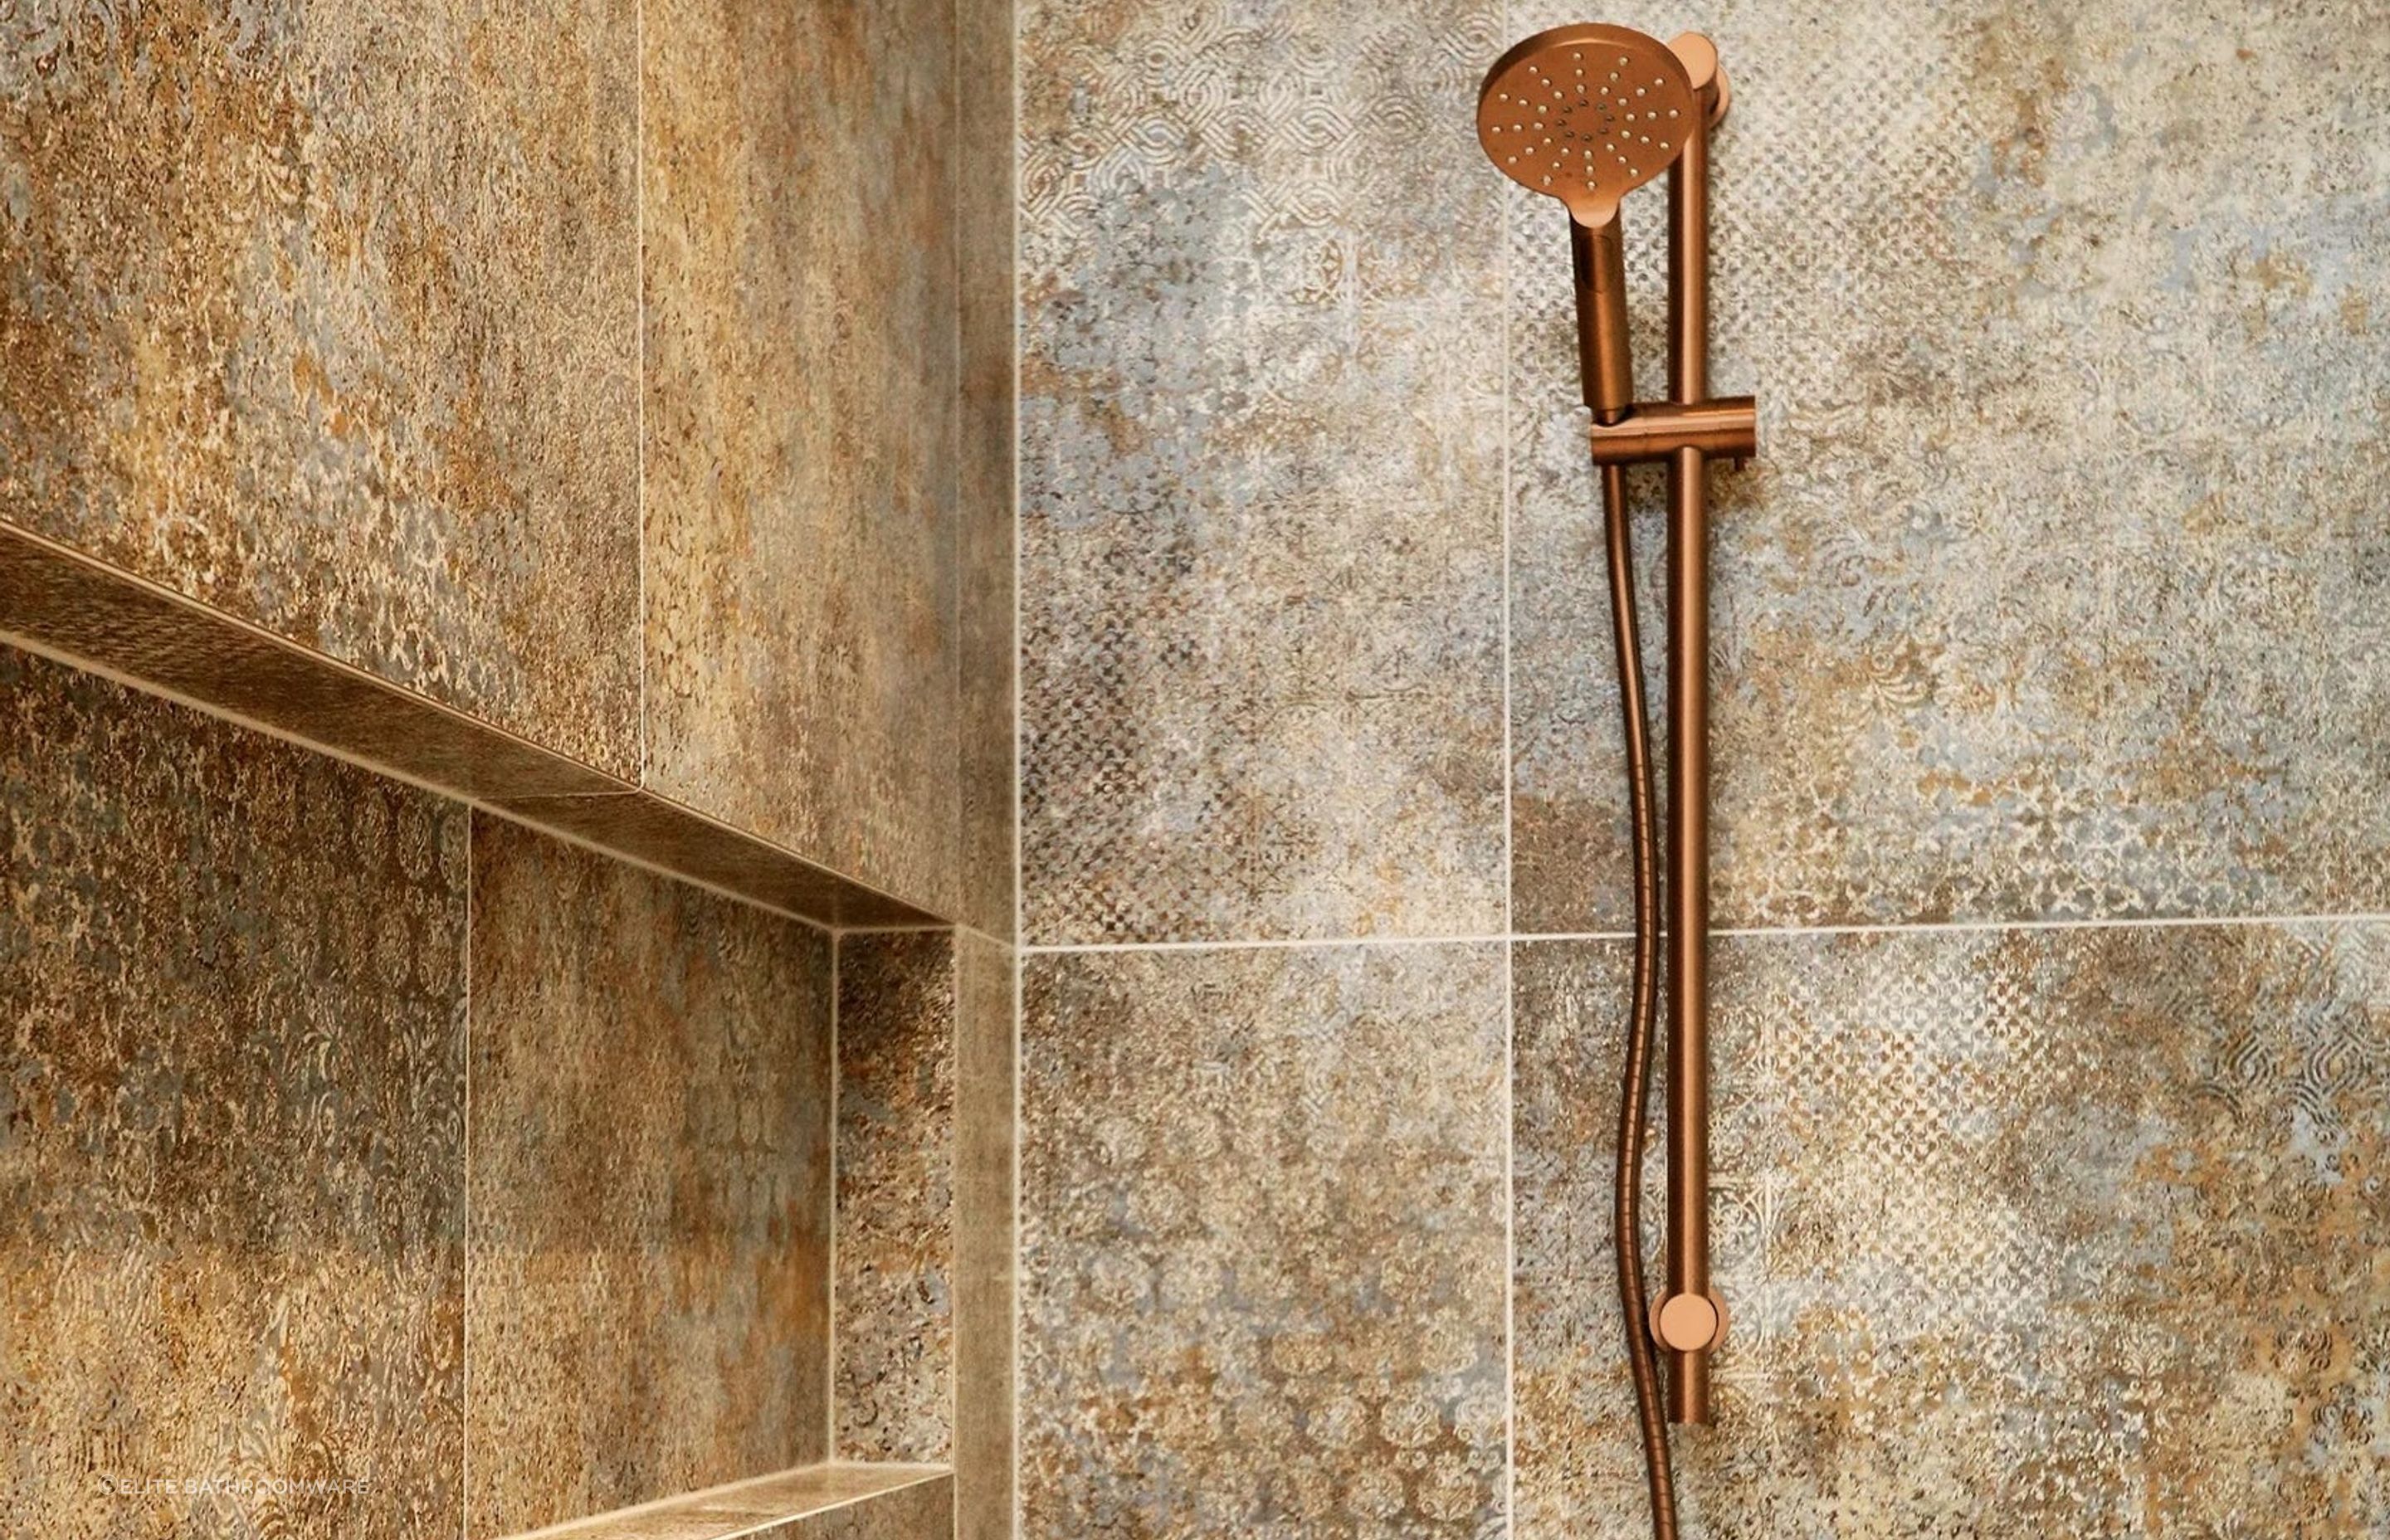 The Code Dusk Round Shower Rail comes with a multi-function handpiece for even greater versatility.